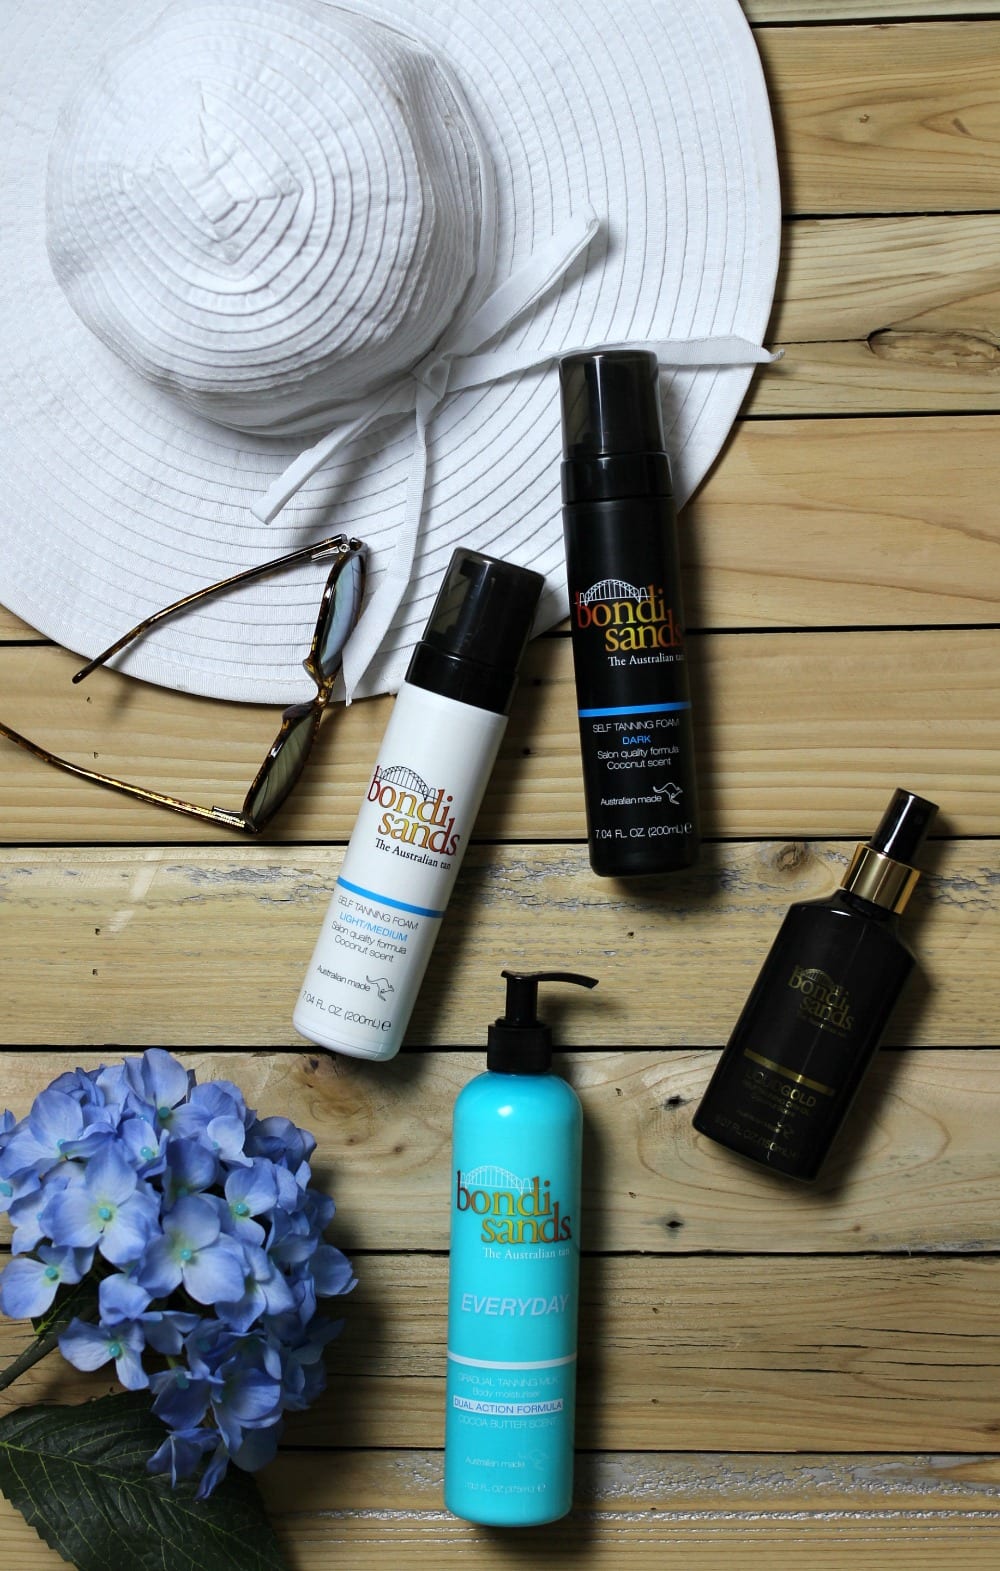 Do you want a summer tan without the sun? Read on to see how sunless tanning products can give you a gorgeous glow with some of my best sunless tanning tips and hacks.